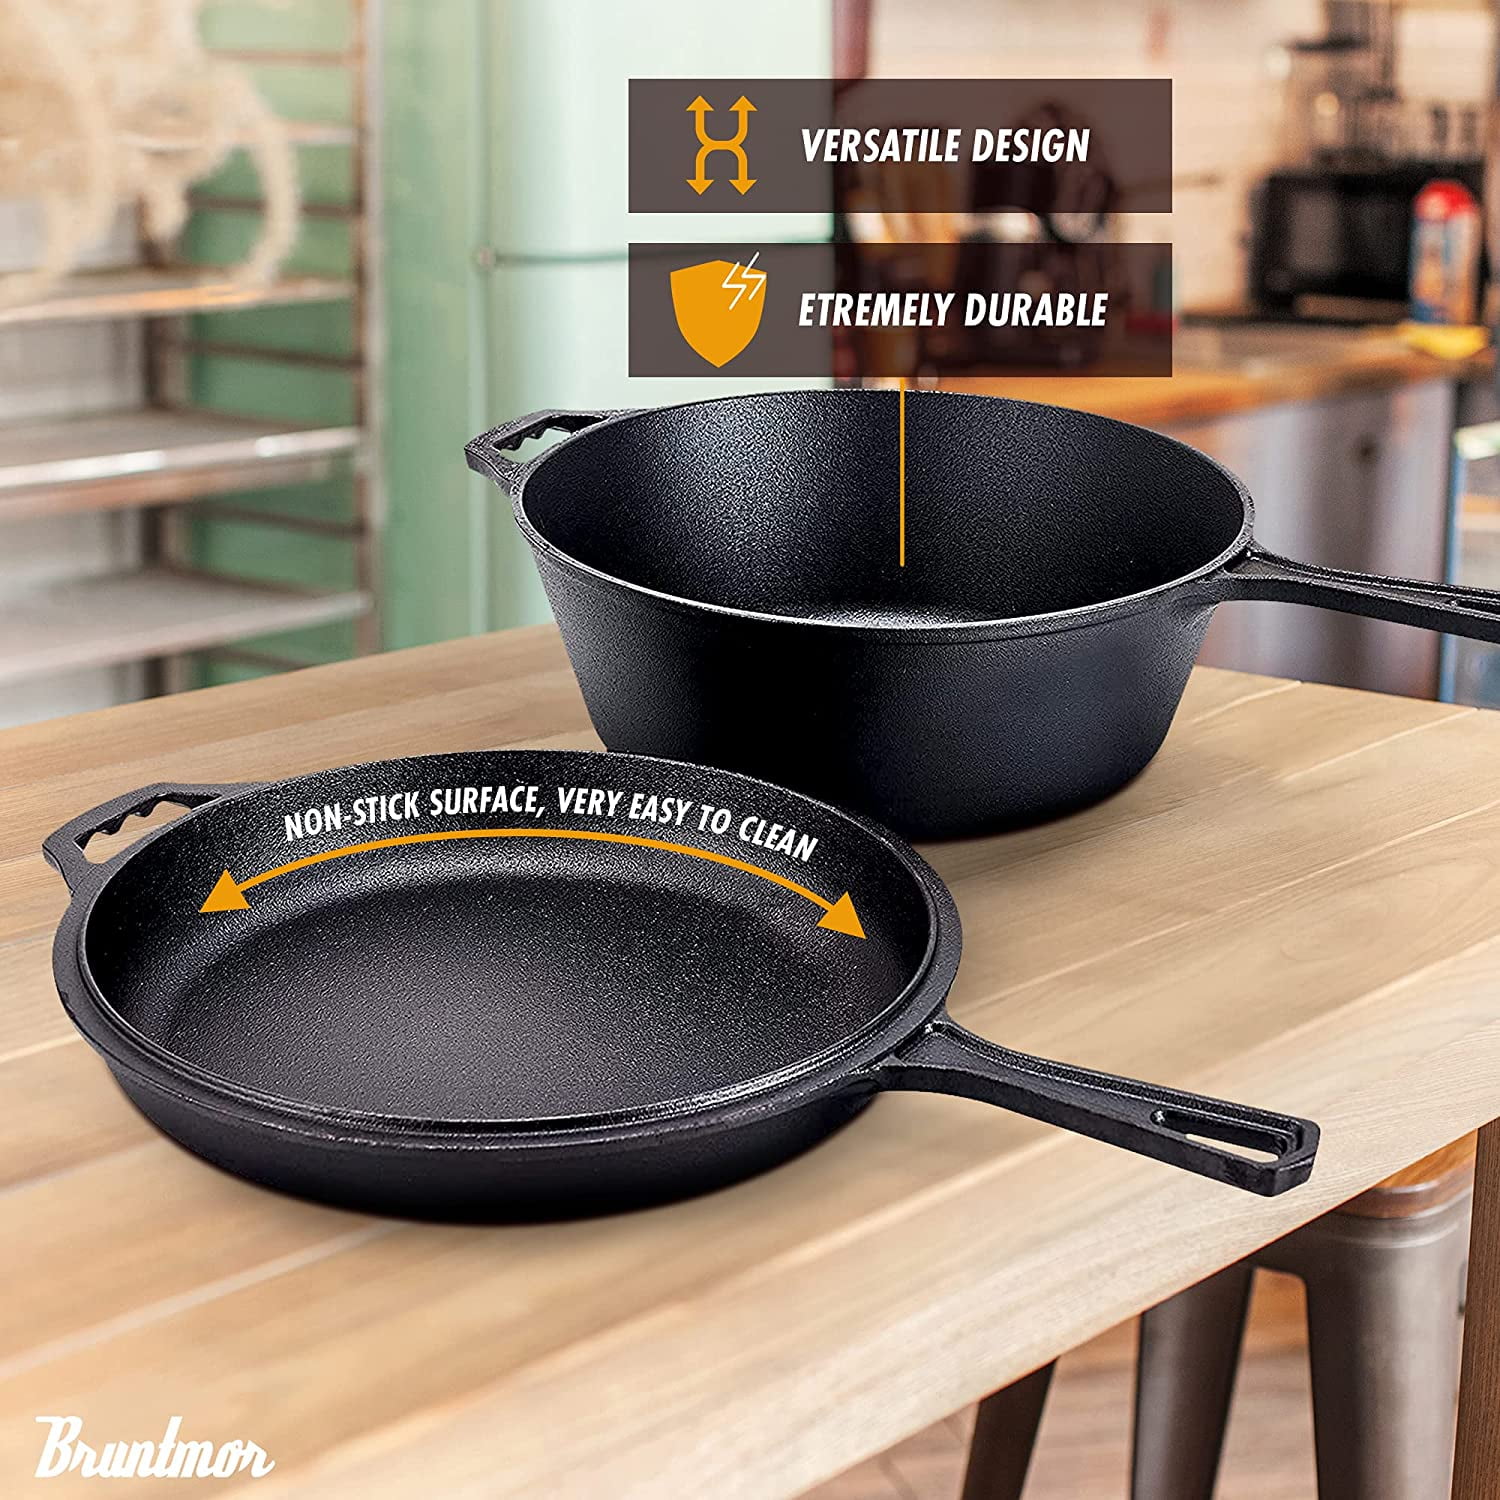 Bruntmor 2.3 Quart Pre-seasoned Cast Iron Dutch Oven With Handles, Lid And  Silicone Accessories, 2.3 Qt Black Cast Iron Skillet, Pre-seasoned Shallow